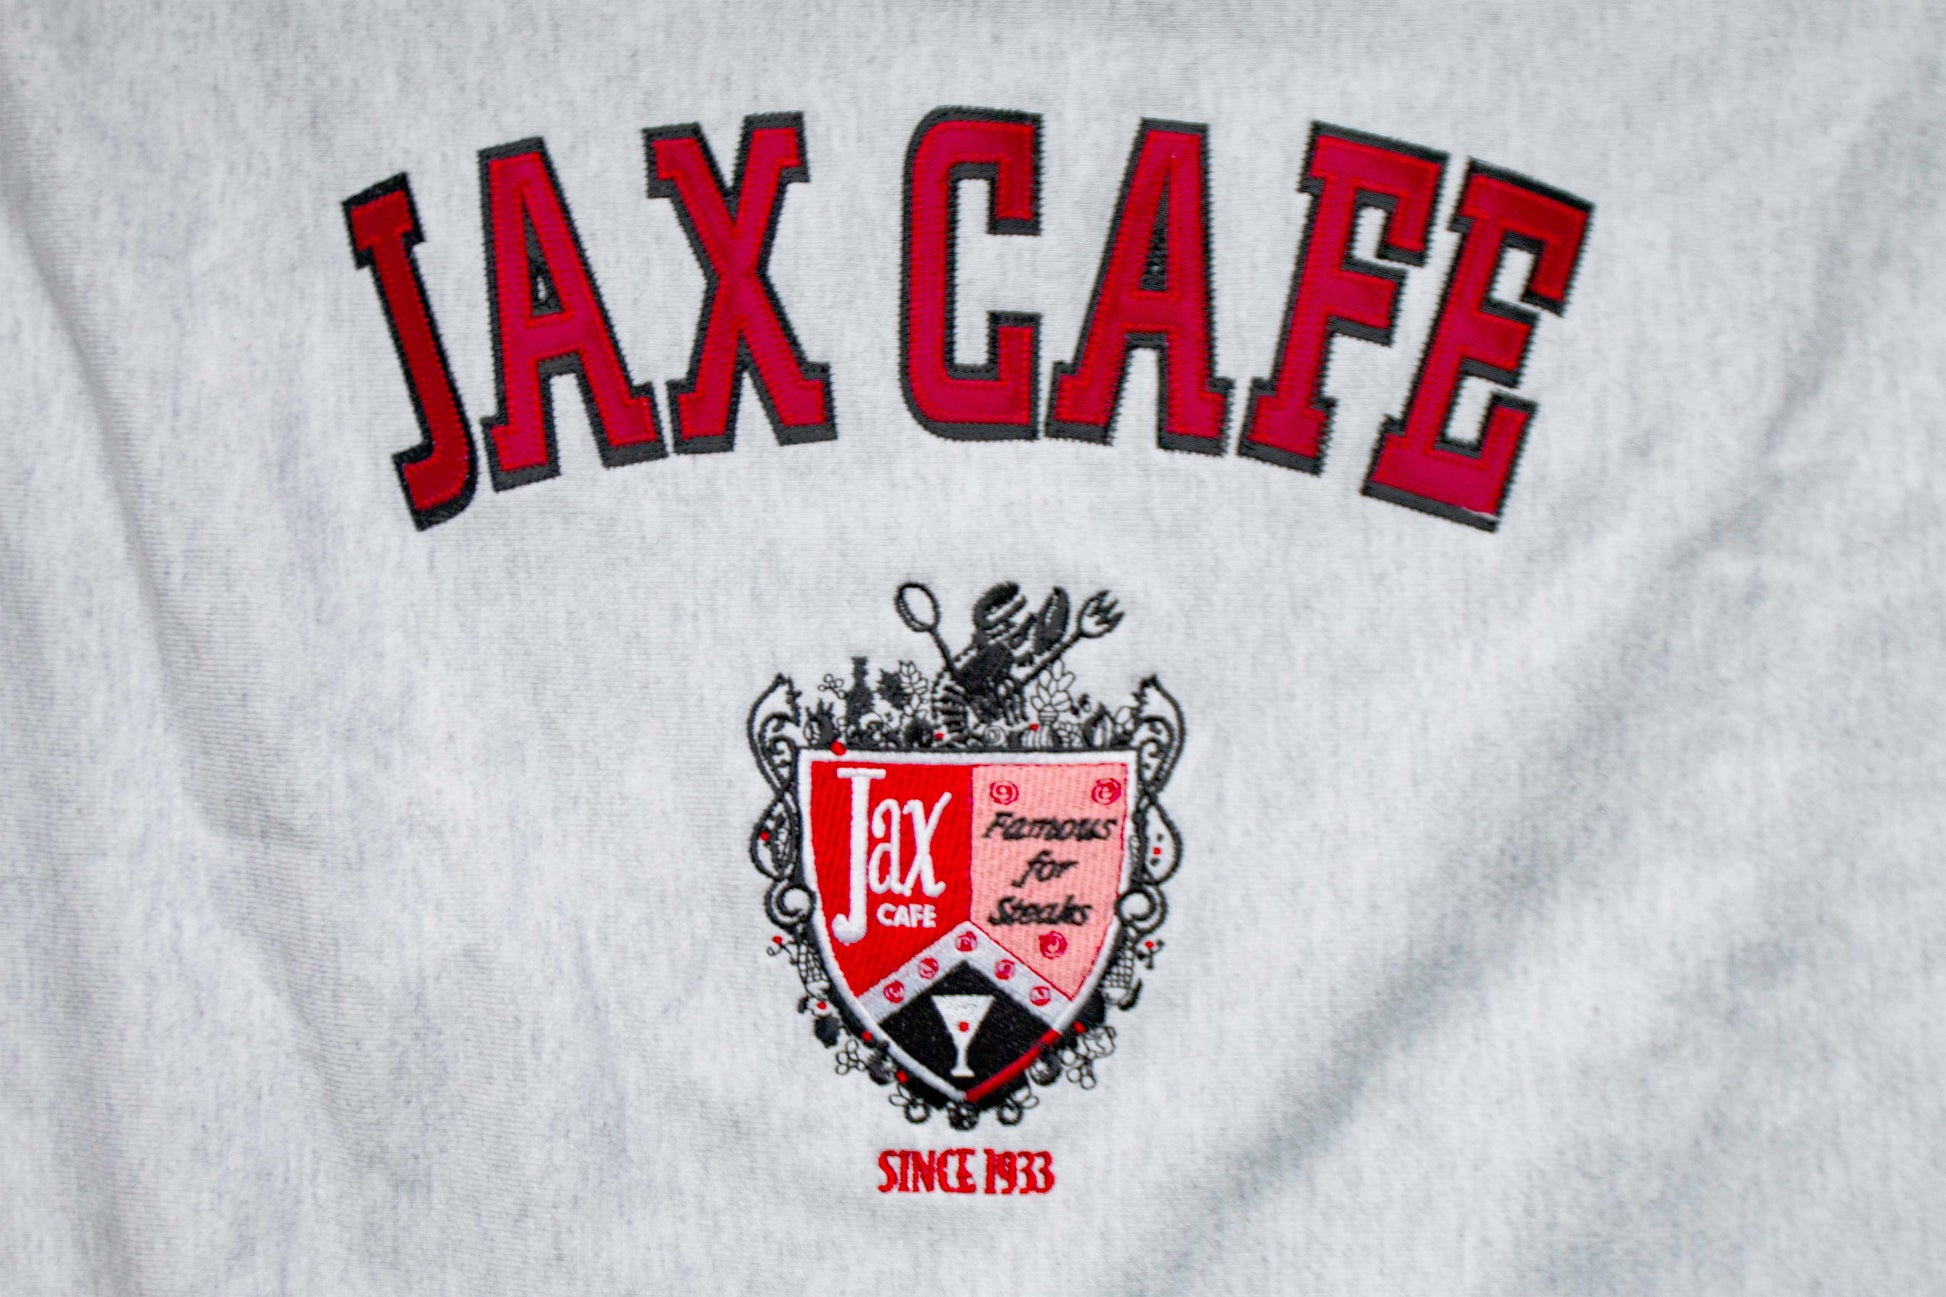 Jax Cafe Famous for steaks since 1933